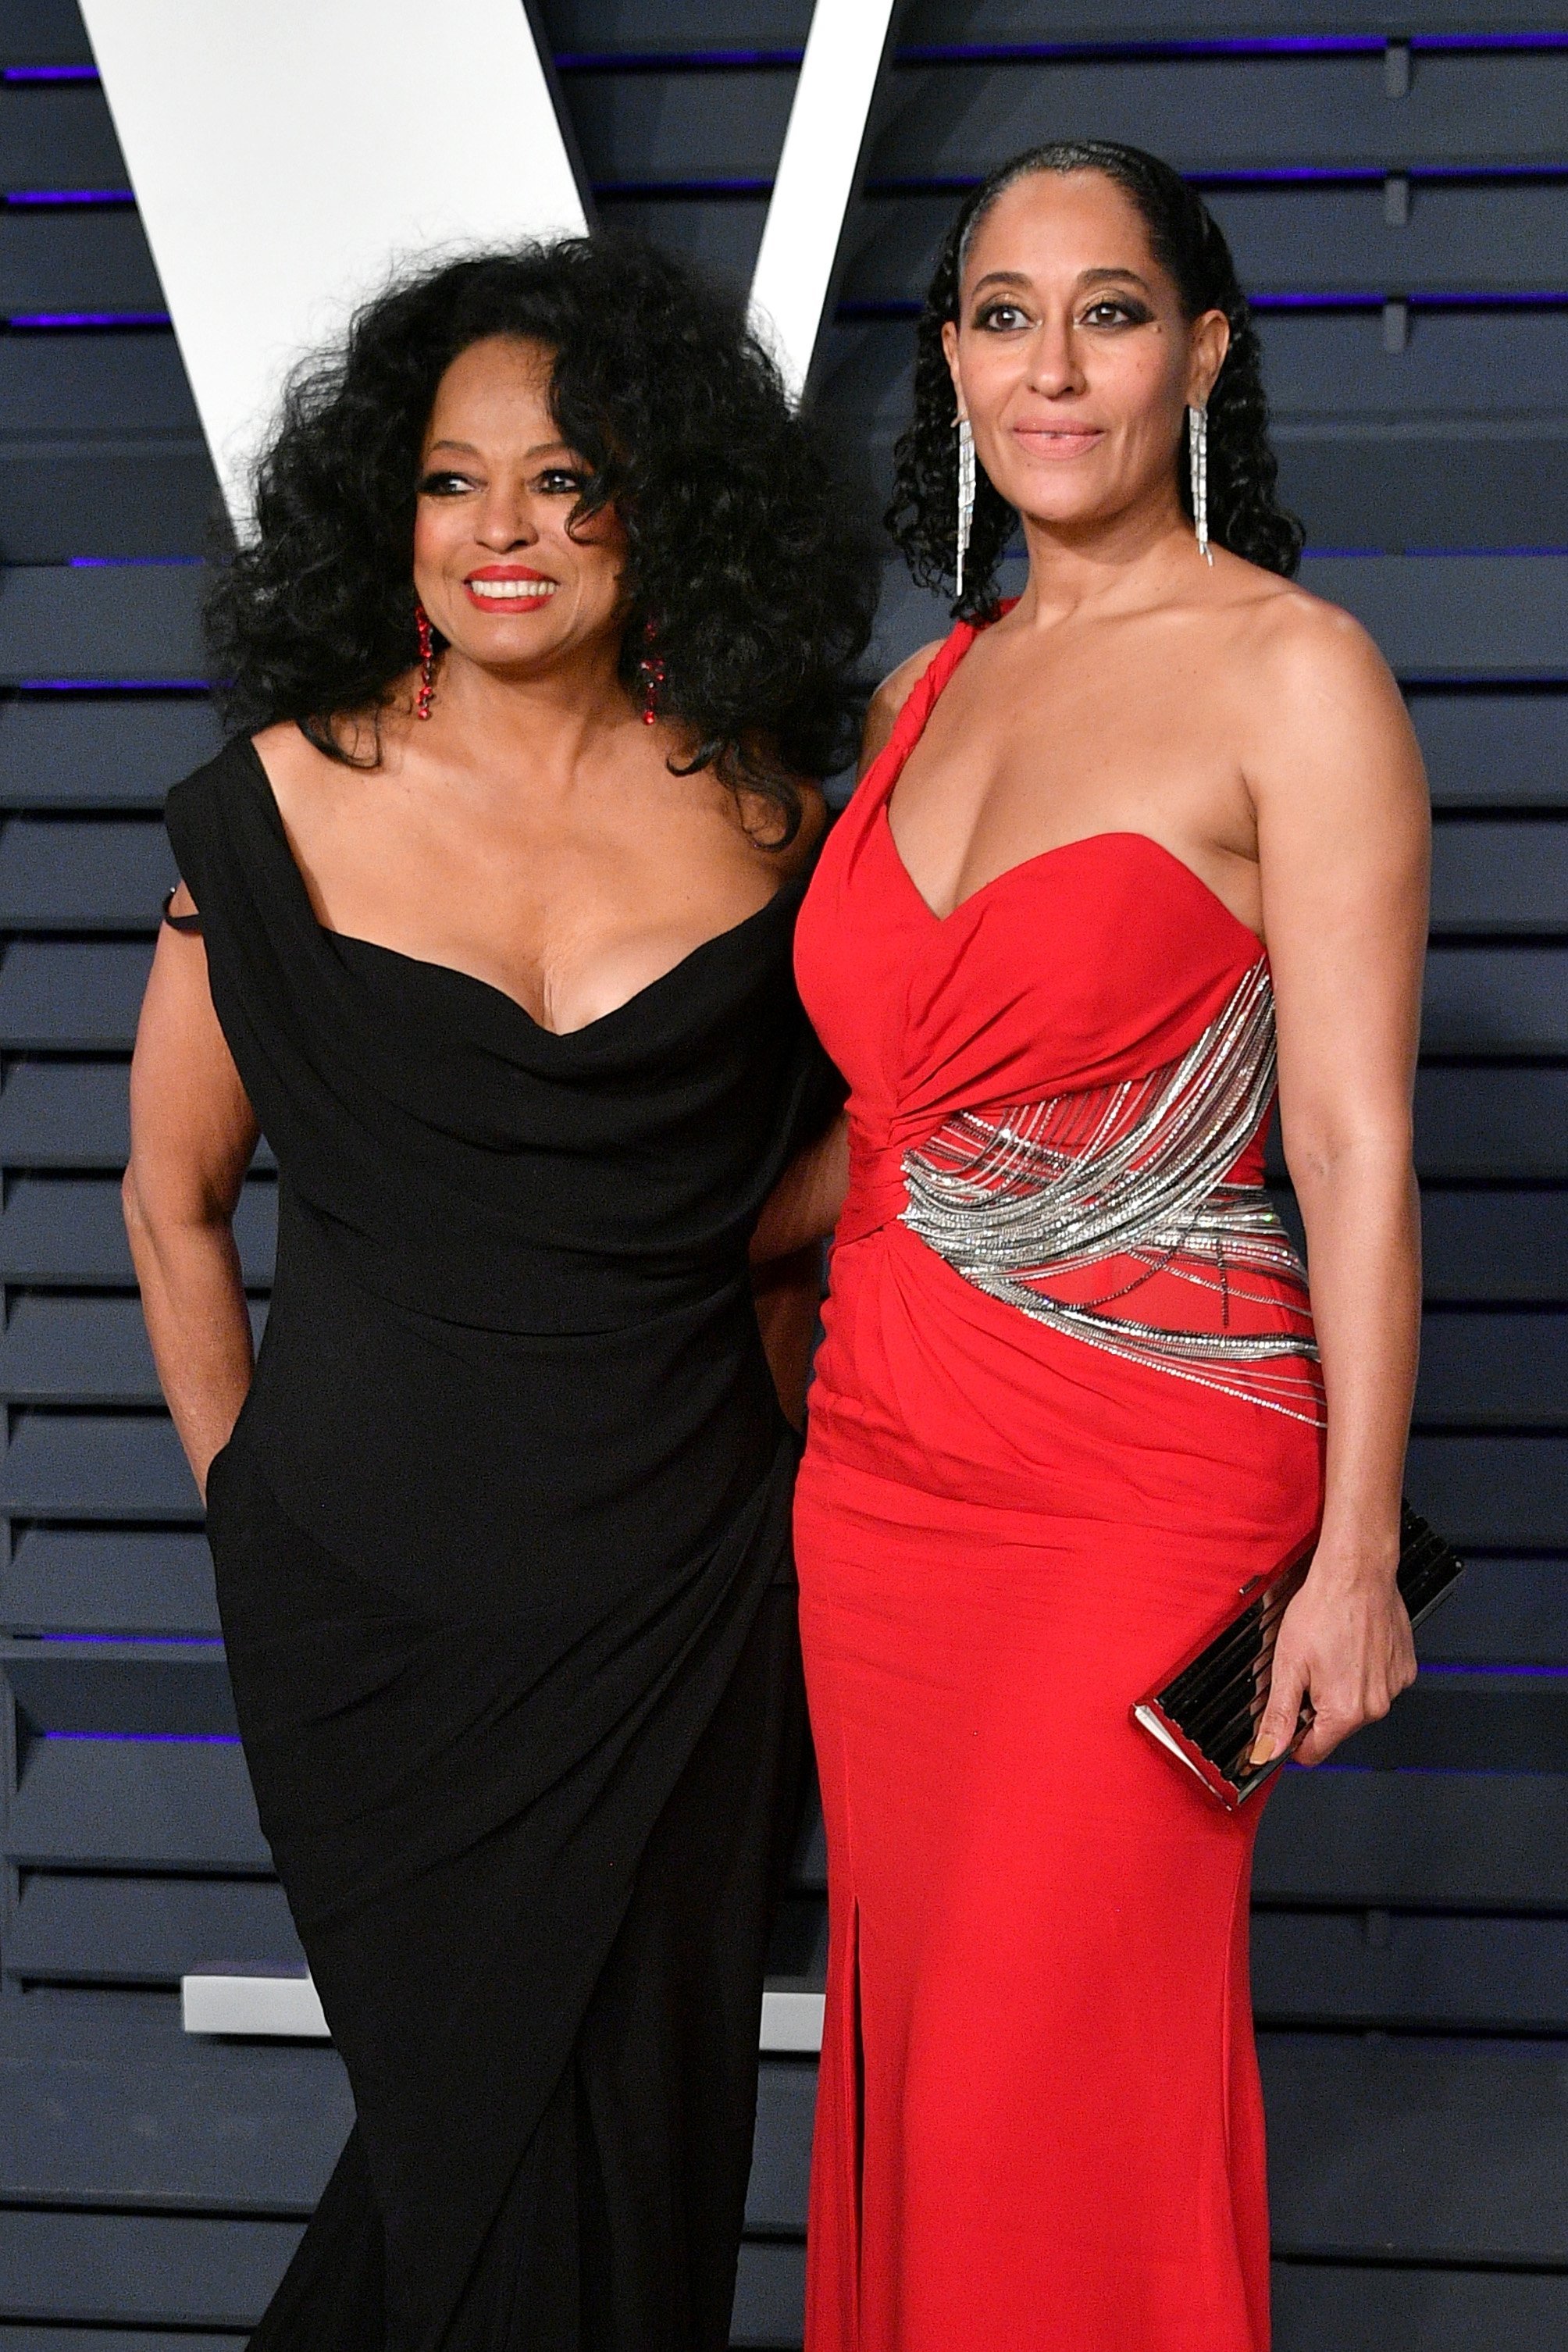 Diana Ross and her daughter, Tracee Ellis Ross pose for photos at the 2019 Vanity Fair Oscar Party. | Photo: Getty Images